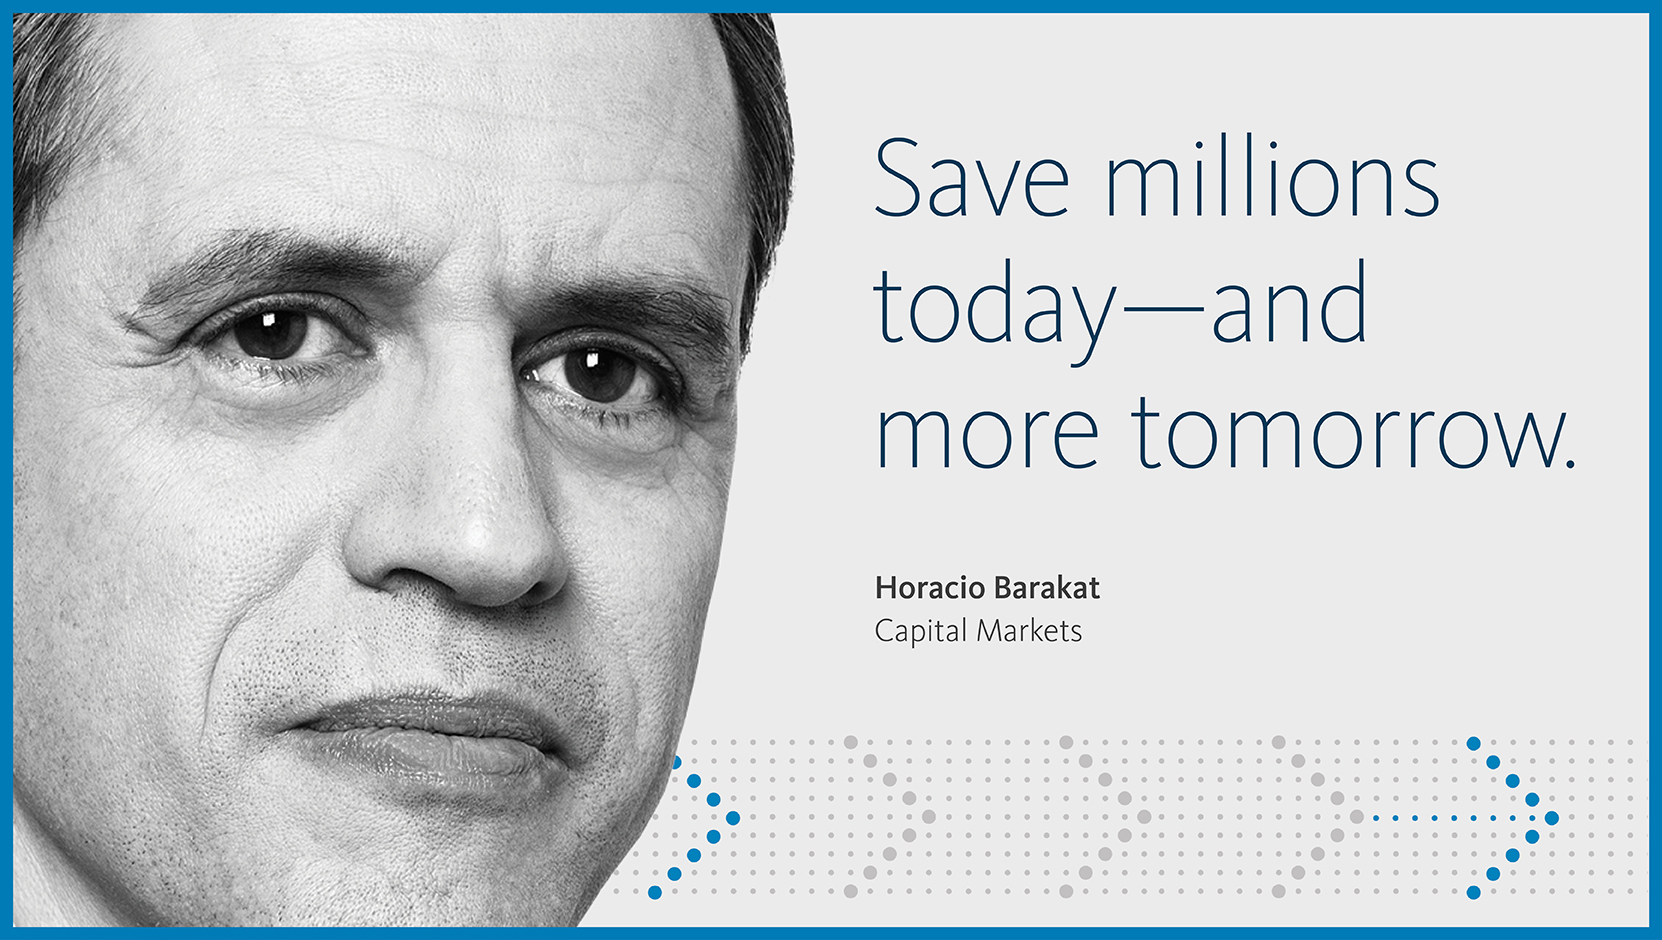 Save millions today - and more tomorrow